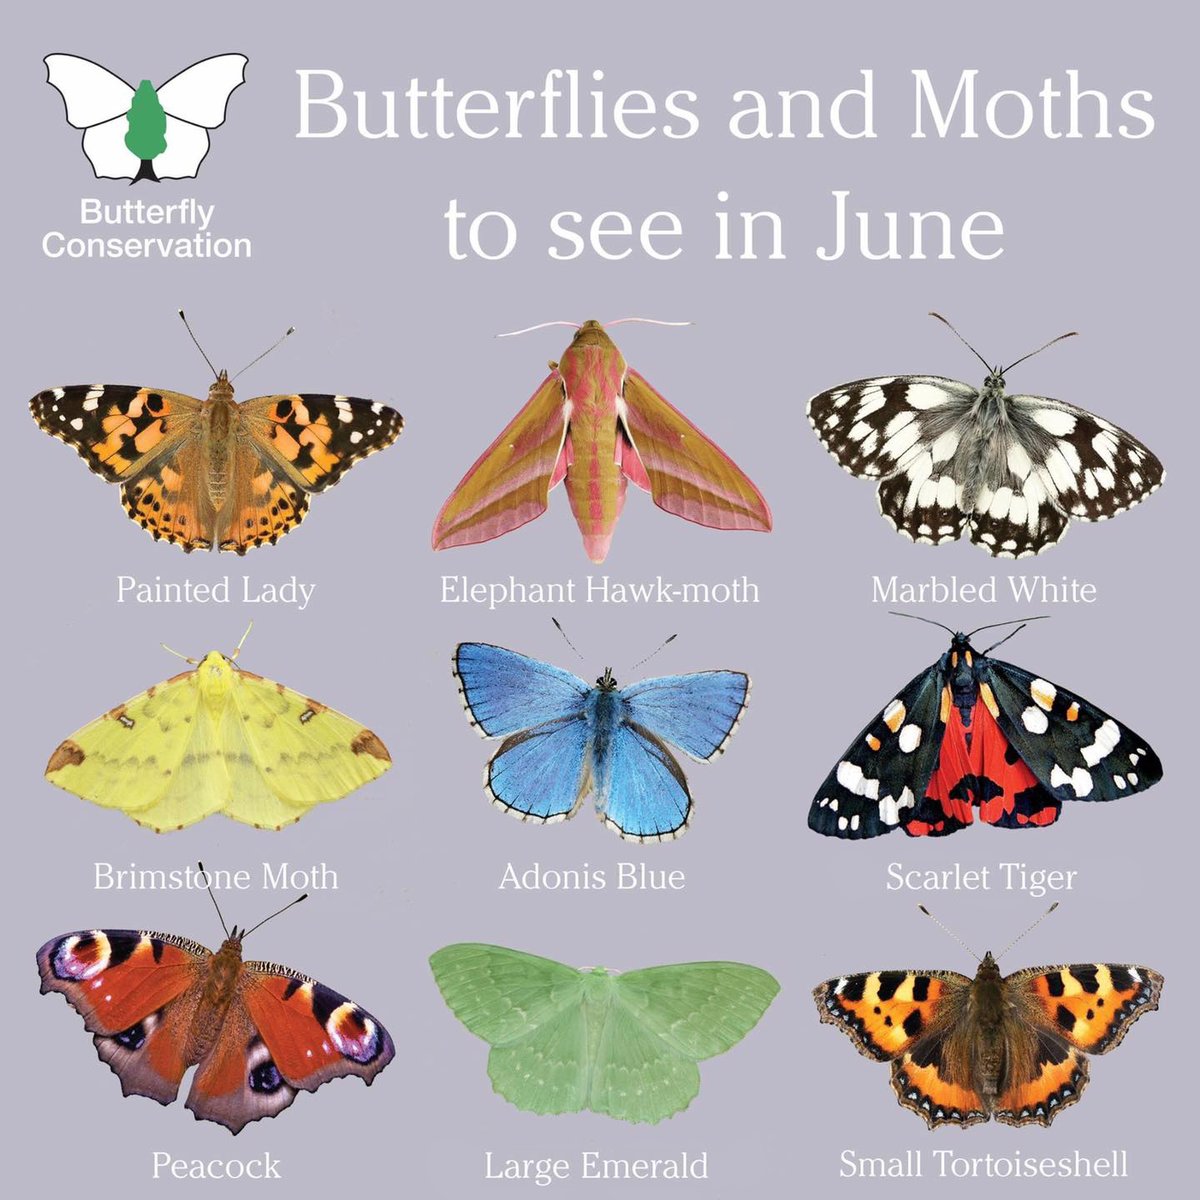 June brings a whole new line-up of brilliant butterflies and moths to spot in your gardens and local green spaces 🦋🌻🌿 Discover more species with tips on how you can help them by signing up to our monthly enewsletter 👉 butrfli.es/2Td2KQg #SaveButterflies #MothsMatter